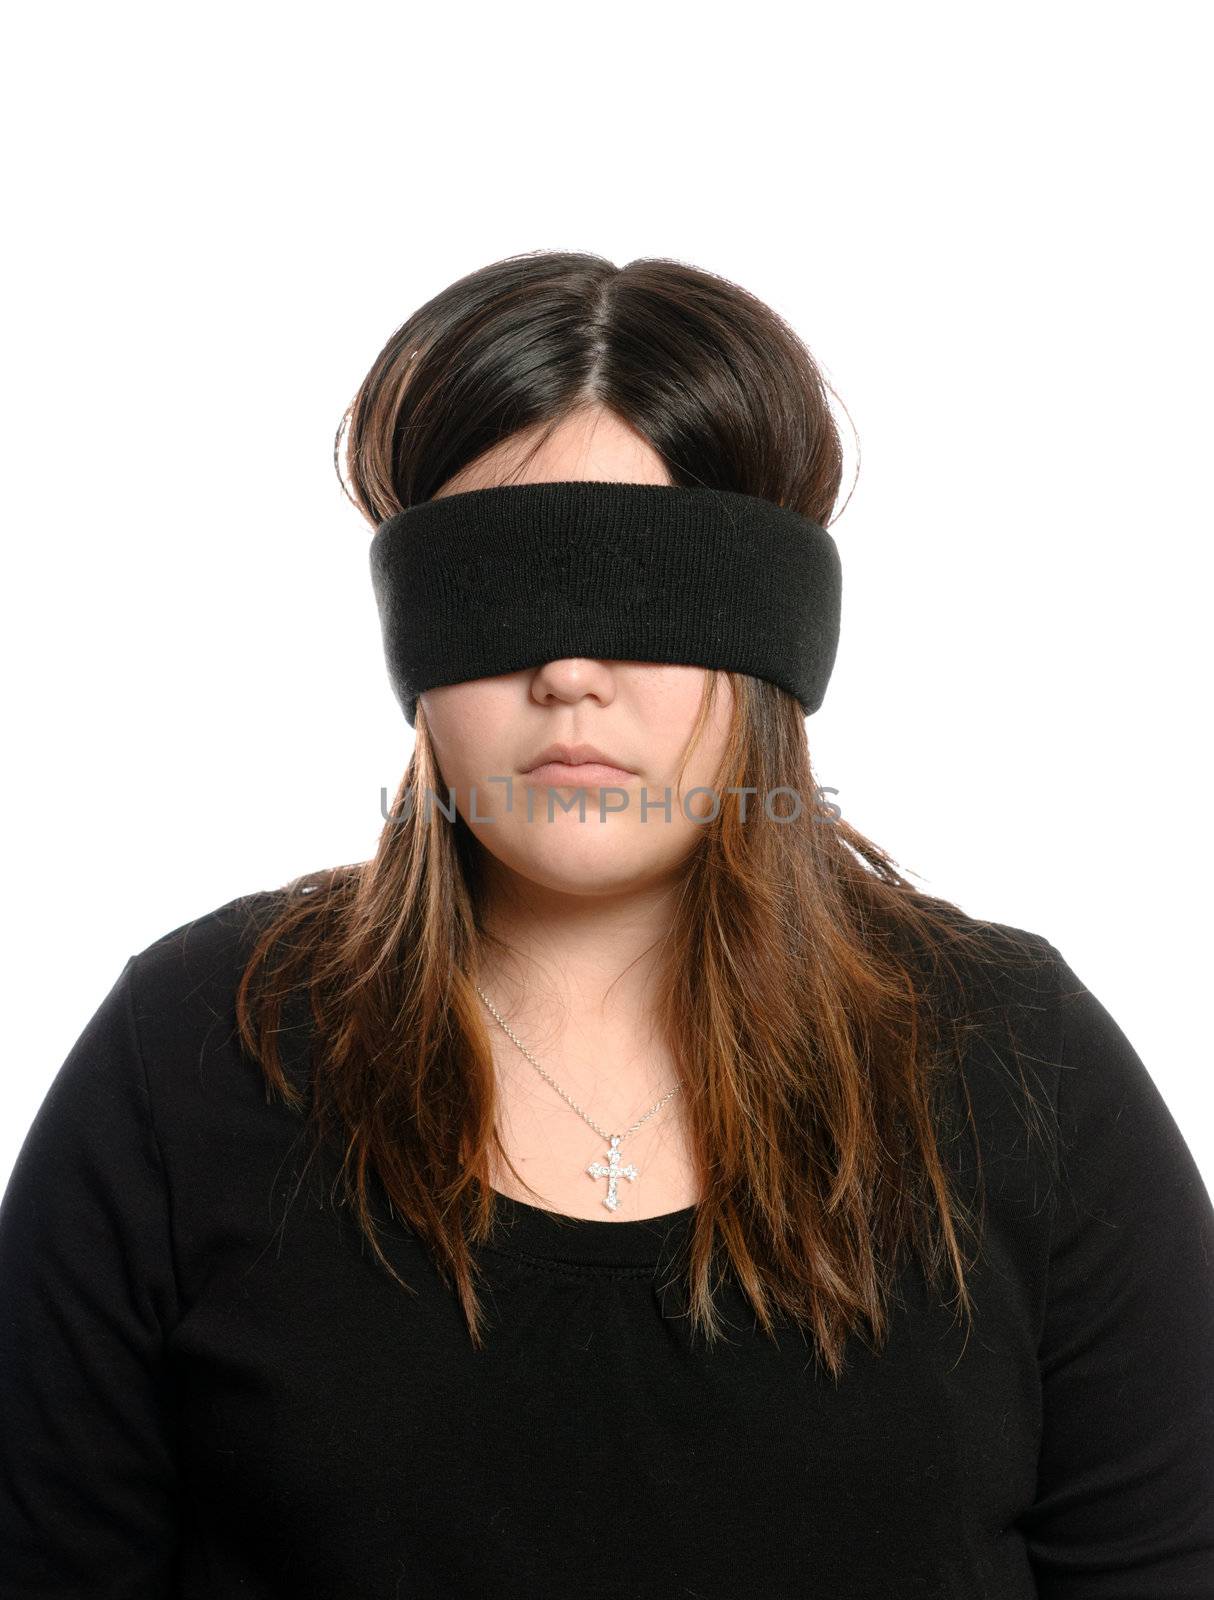 Closeup view of a blindfolded teenager who is wearing a cross necklace.  Could be used for Blind Faith.  Isolated against a white background.